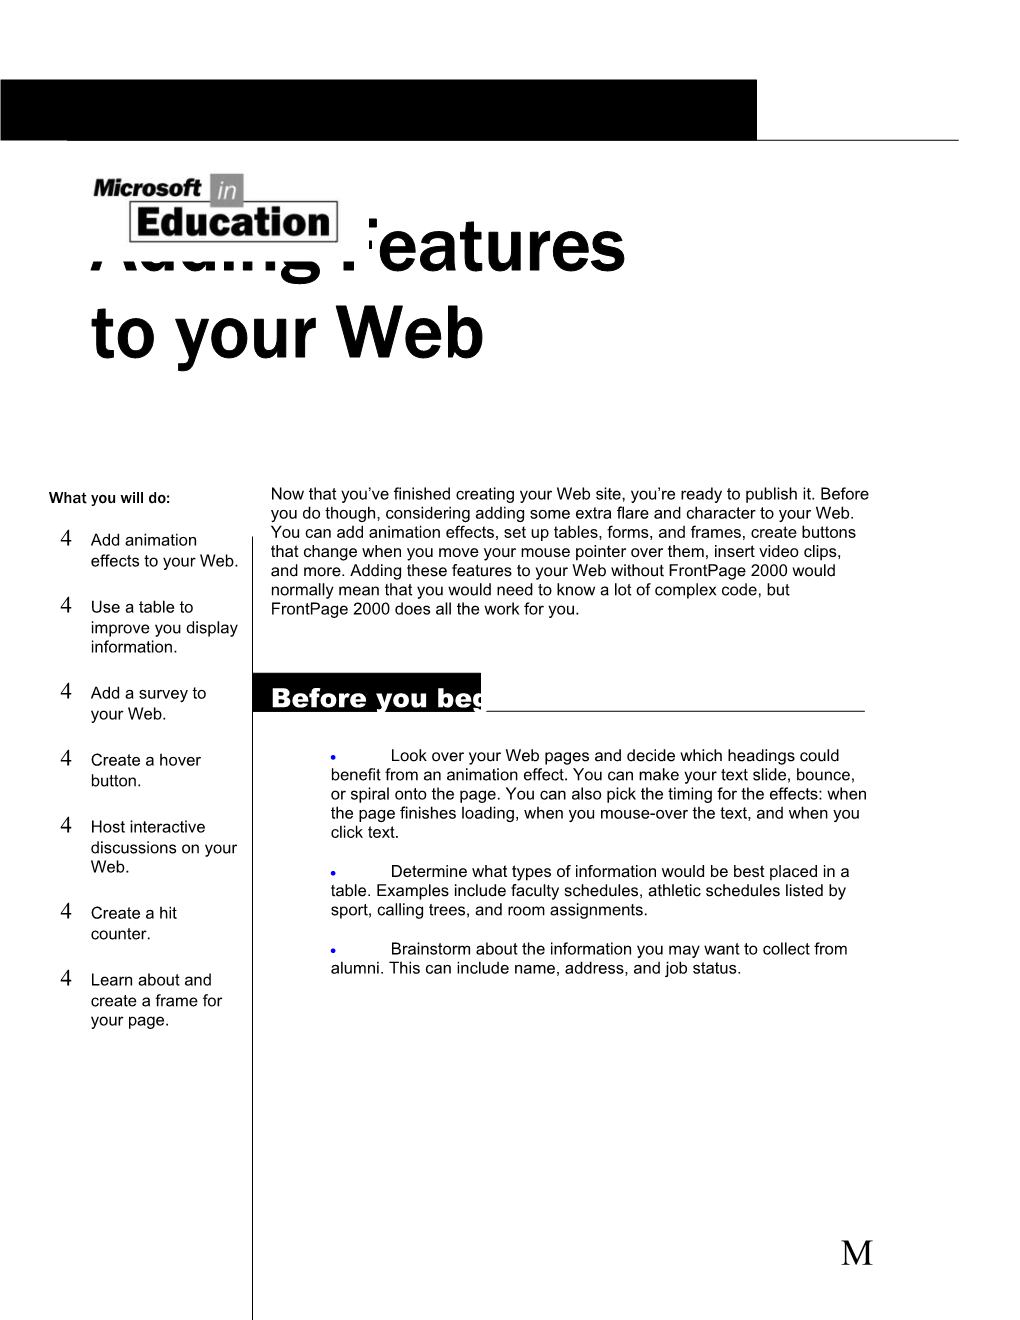 Adding Features to Your Web